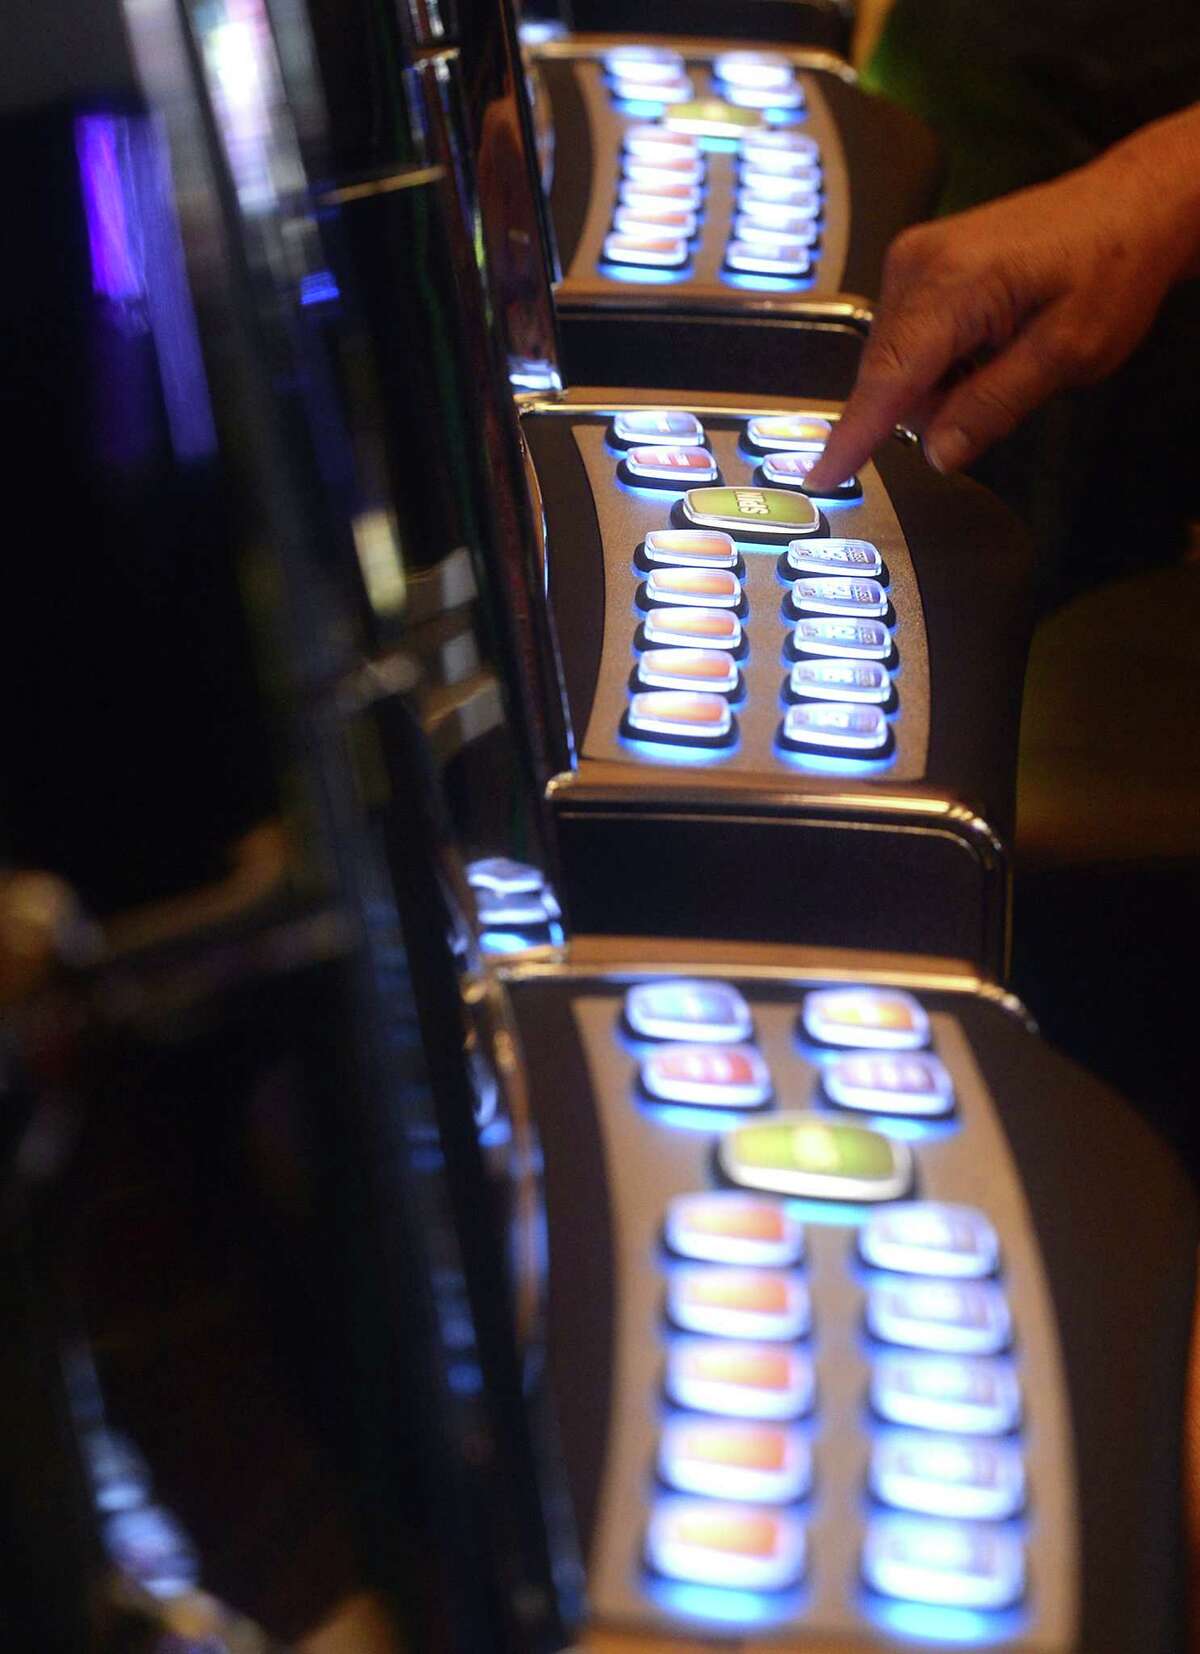 The machines are up and running, with players already arriving to enjoy the newly re-opened Naskila Entertainment bingo hall on the grounds of the Alabama-Coushatta Tribe's reservation Tuesday. The official opening of the venue is June 2, but word of mouth had already attracted guests to the soft opening. The bingo hall has been closed for 13 years, and the Attorney General declined to comment on whether he will seek to once again close the establishment. Photo taken Tuesday, May 17, 2016 Kim Brent/The Enterprise